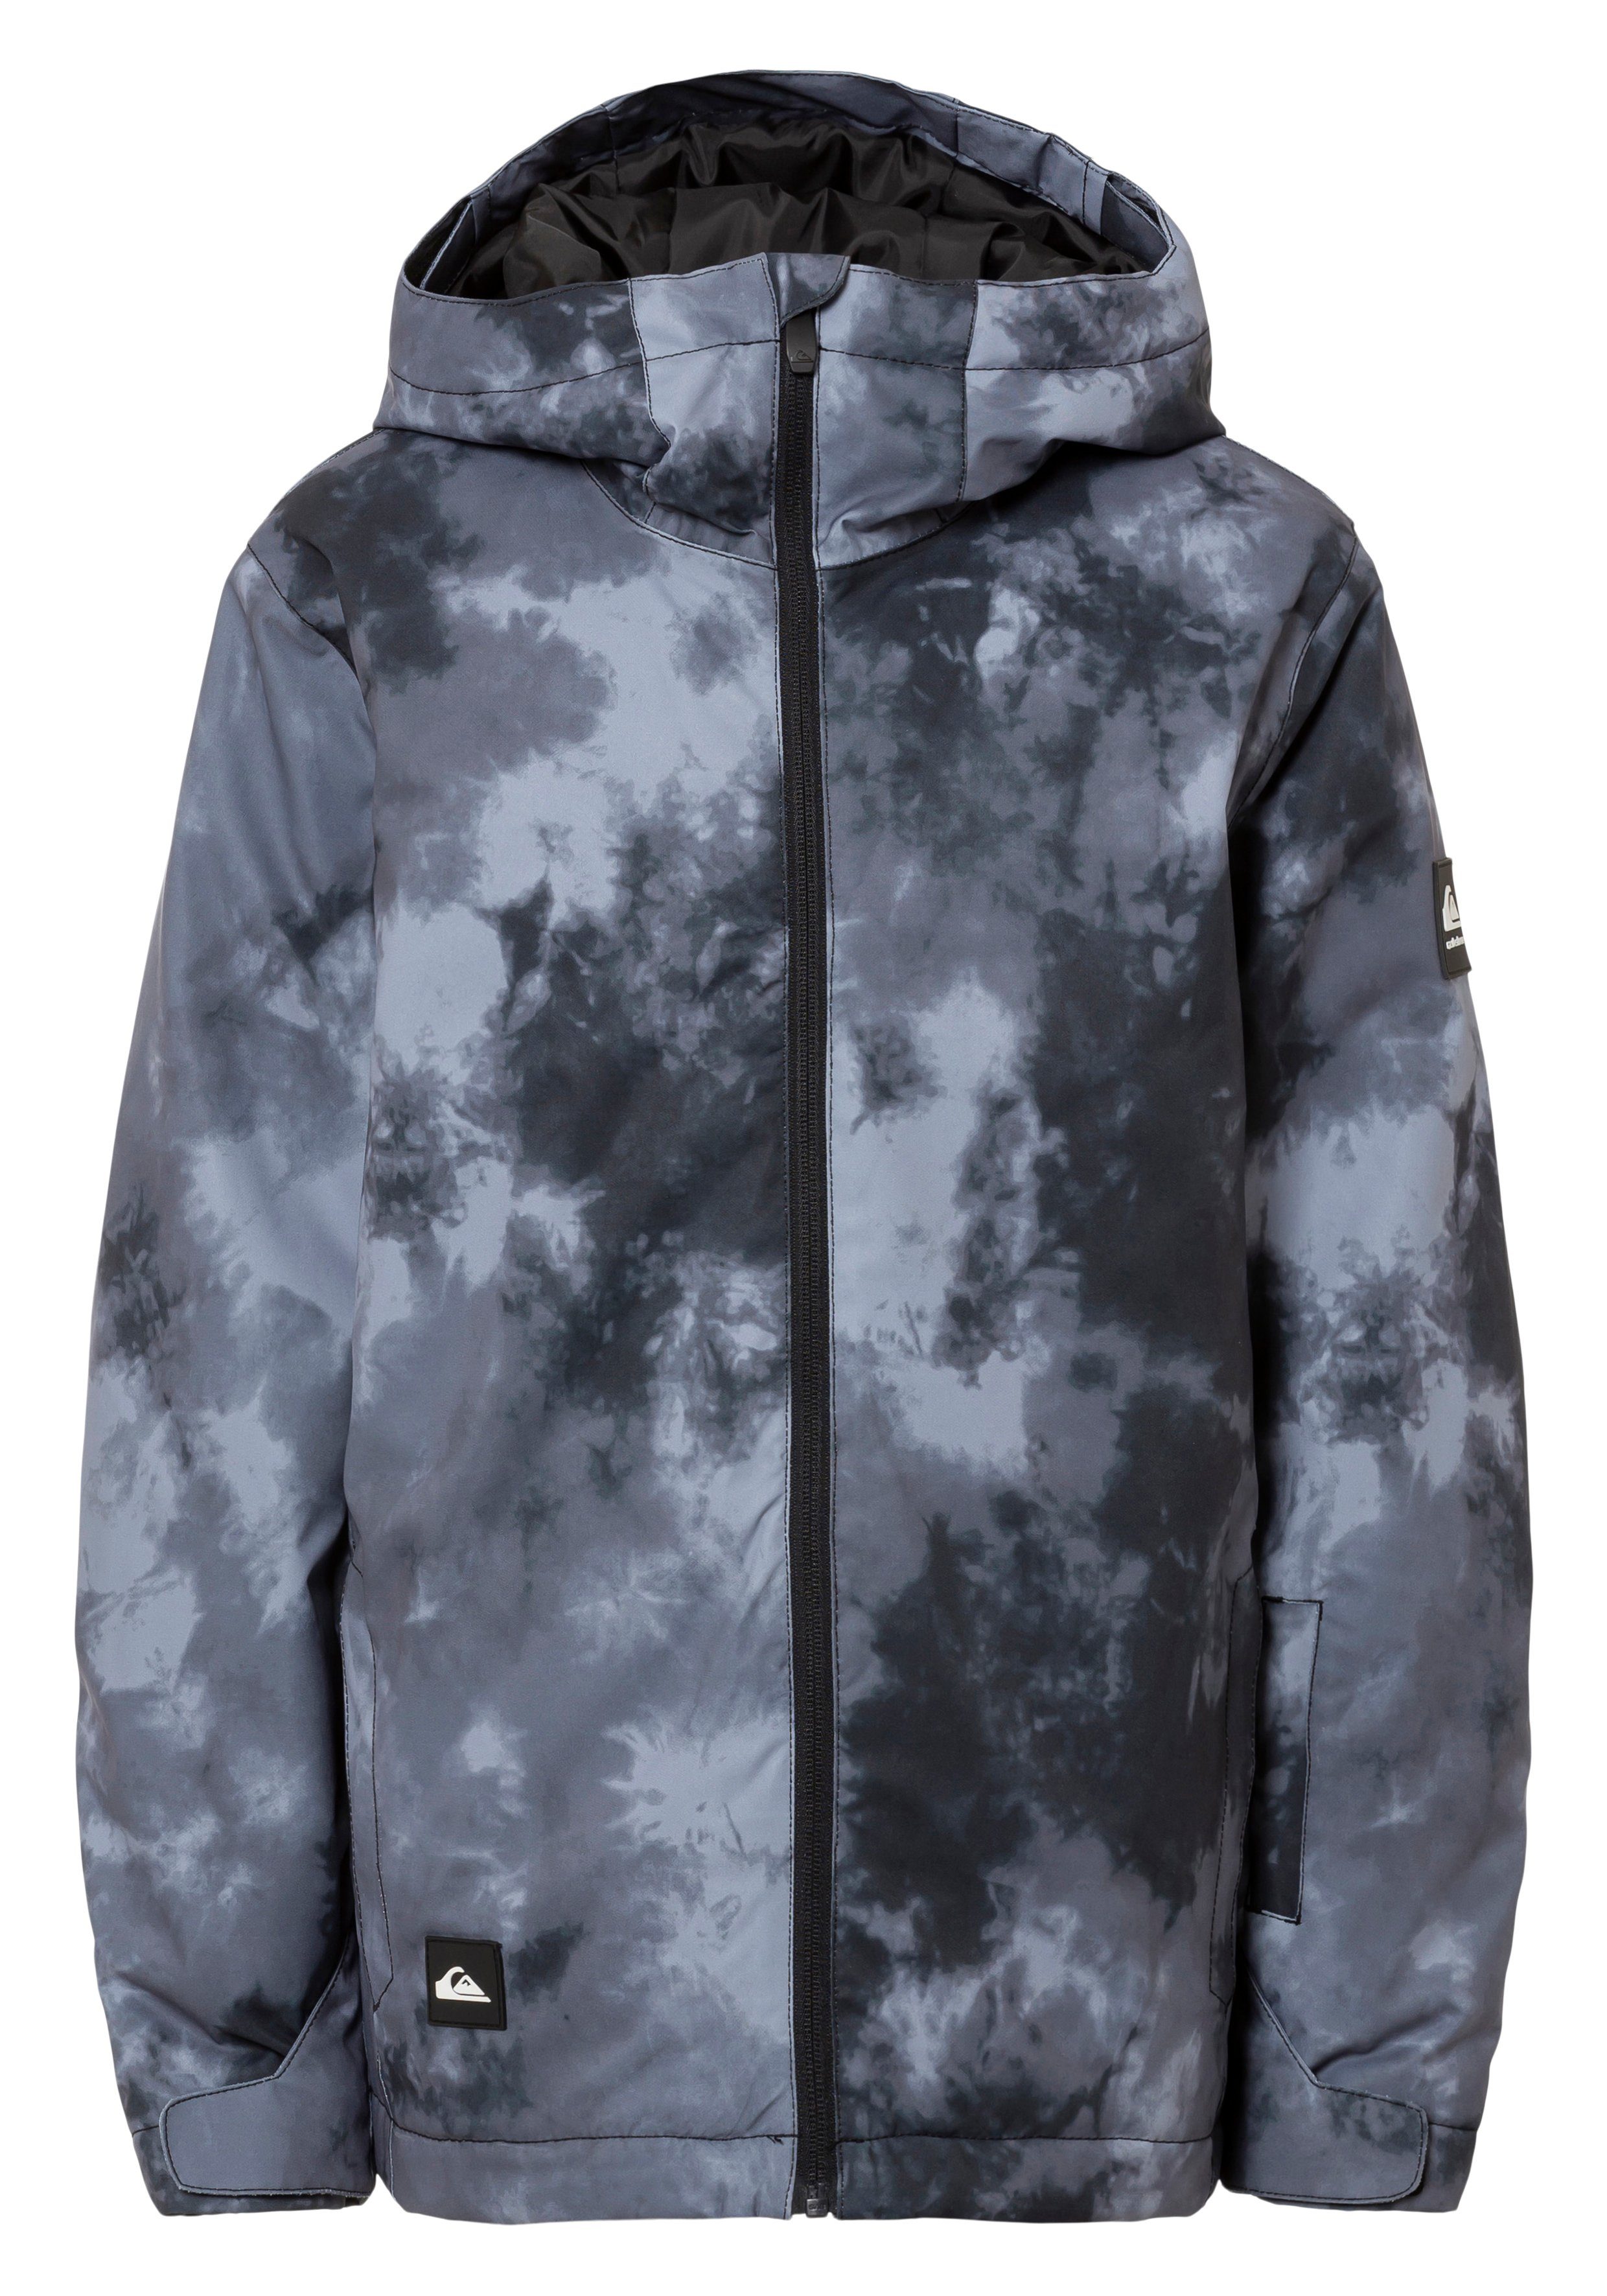 PRINTED YOUTH Quiksilver Outdoorjacke JACKET MISSION